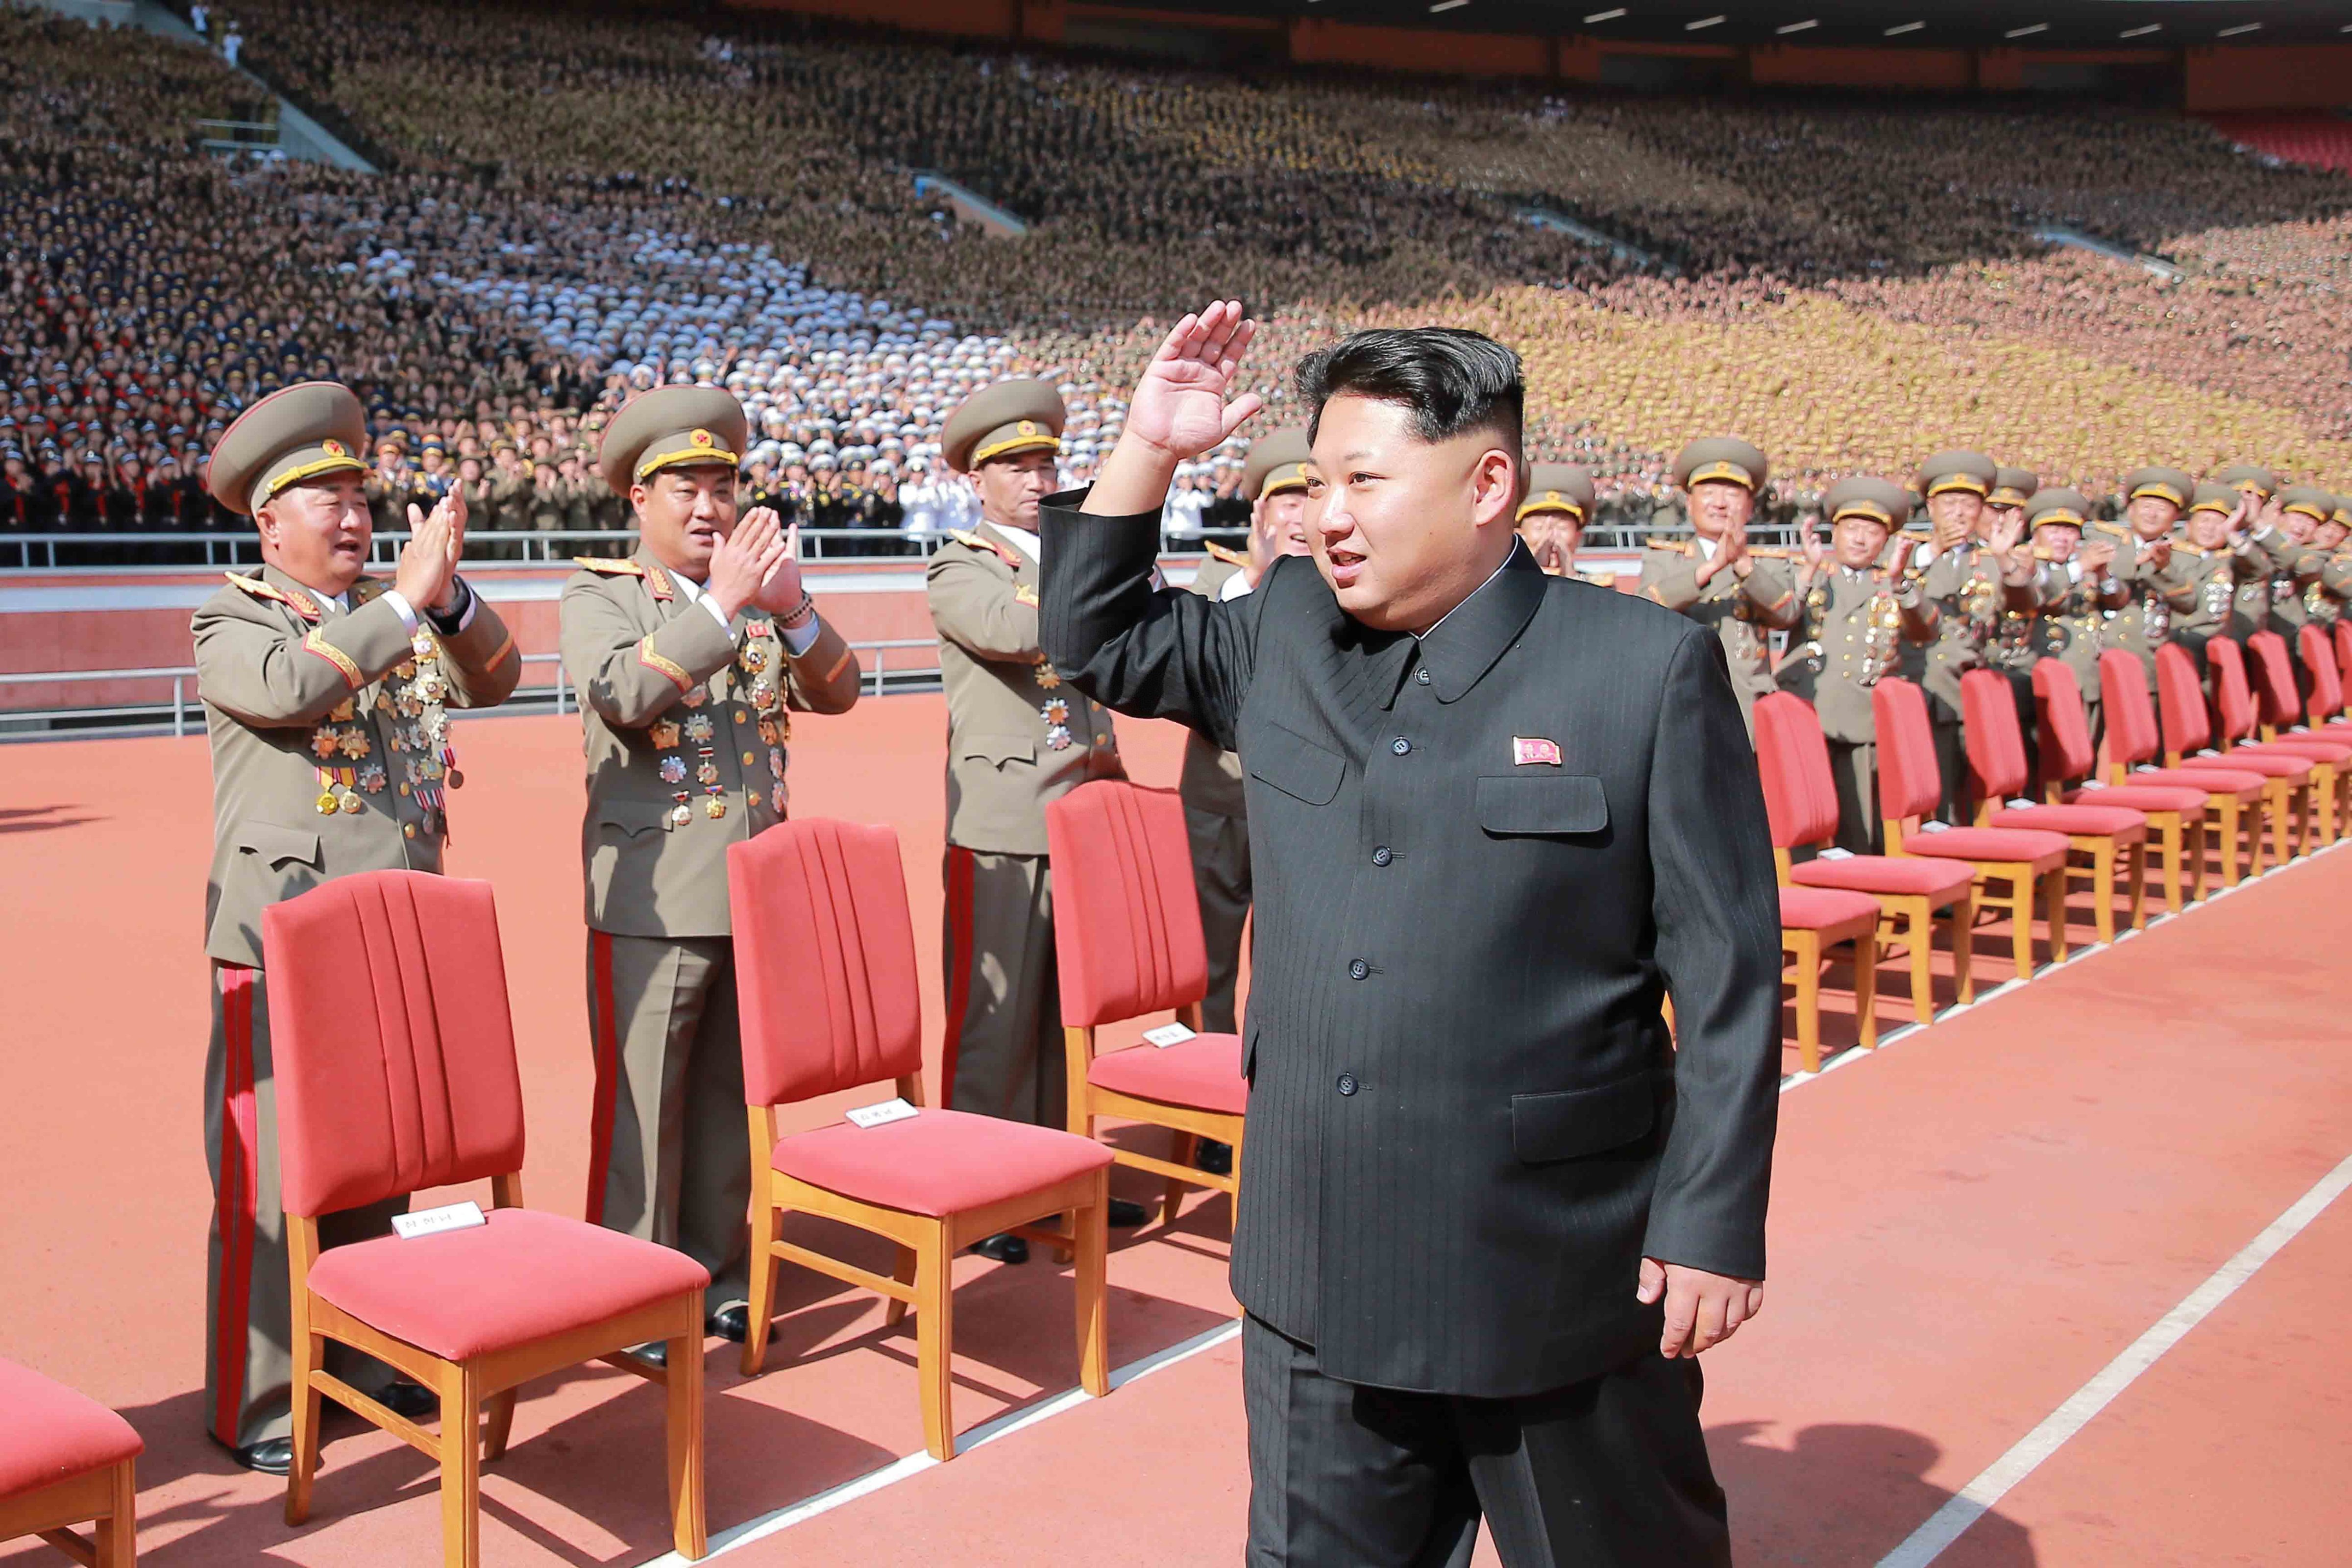 Photo provided by the Korean Central News Agency on Oct. 14, 2015, shows North Korean leader Kim Jong Un having a photo session with the participants in the military parade celebrating the 70th anniversary of the ruling Workers' Party in Pyongyang (Xinhua News Agency/Getty Images)